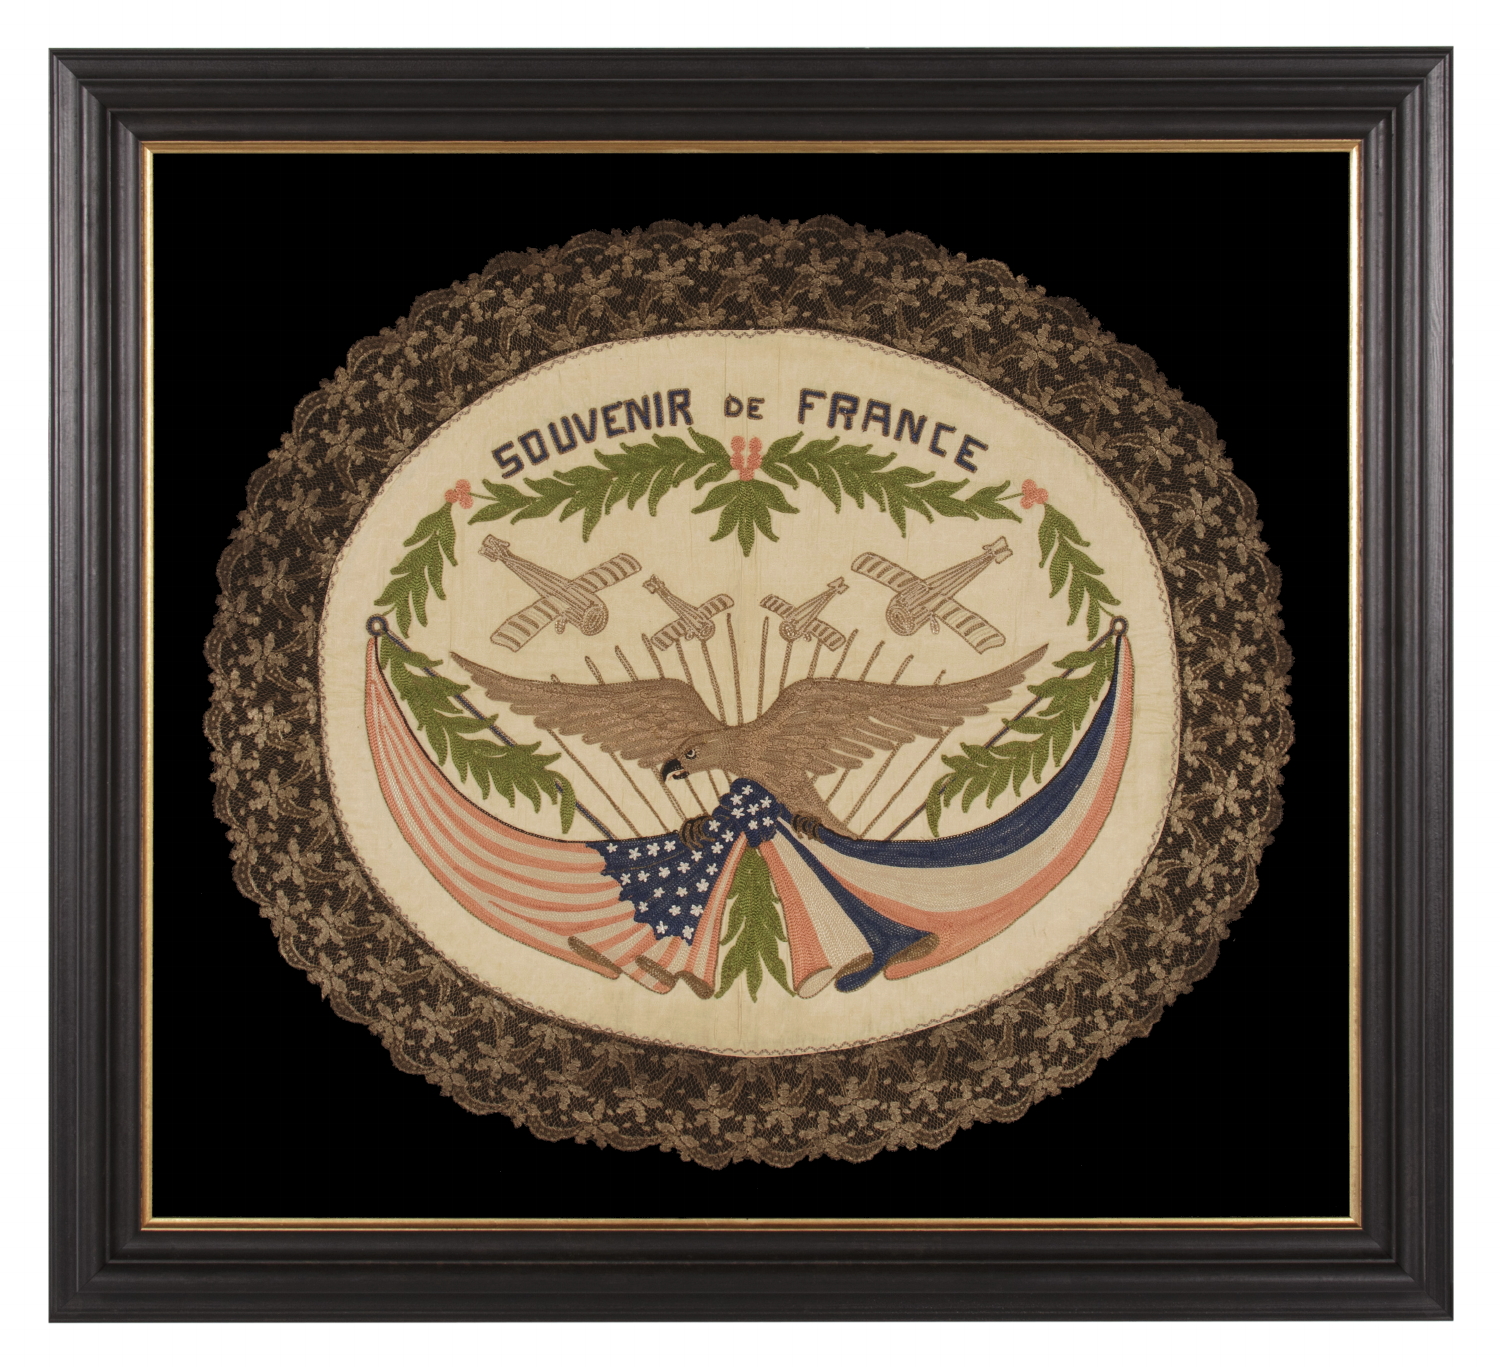 FRANCO-AMERICAN TEXTILE WITH THE IMAGE OF AN EAGLE SUPPORTING KNOTTED & DRAPED AMERICAN AND FRENCH FLAGS BENEATH FOUR WAR PLANES; EMBROIDERED SILK FLOSS AND METALLIC BULLION THREAD ON A SILK GROUND, WITH ELABORATE BULLION FRINGE, MADE TO CELEBRATE THE END OF WWI (U.S. INVOLVEMENT 1917-18)